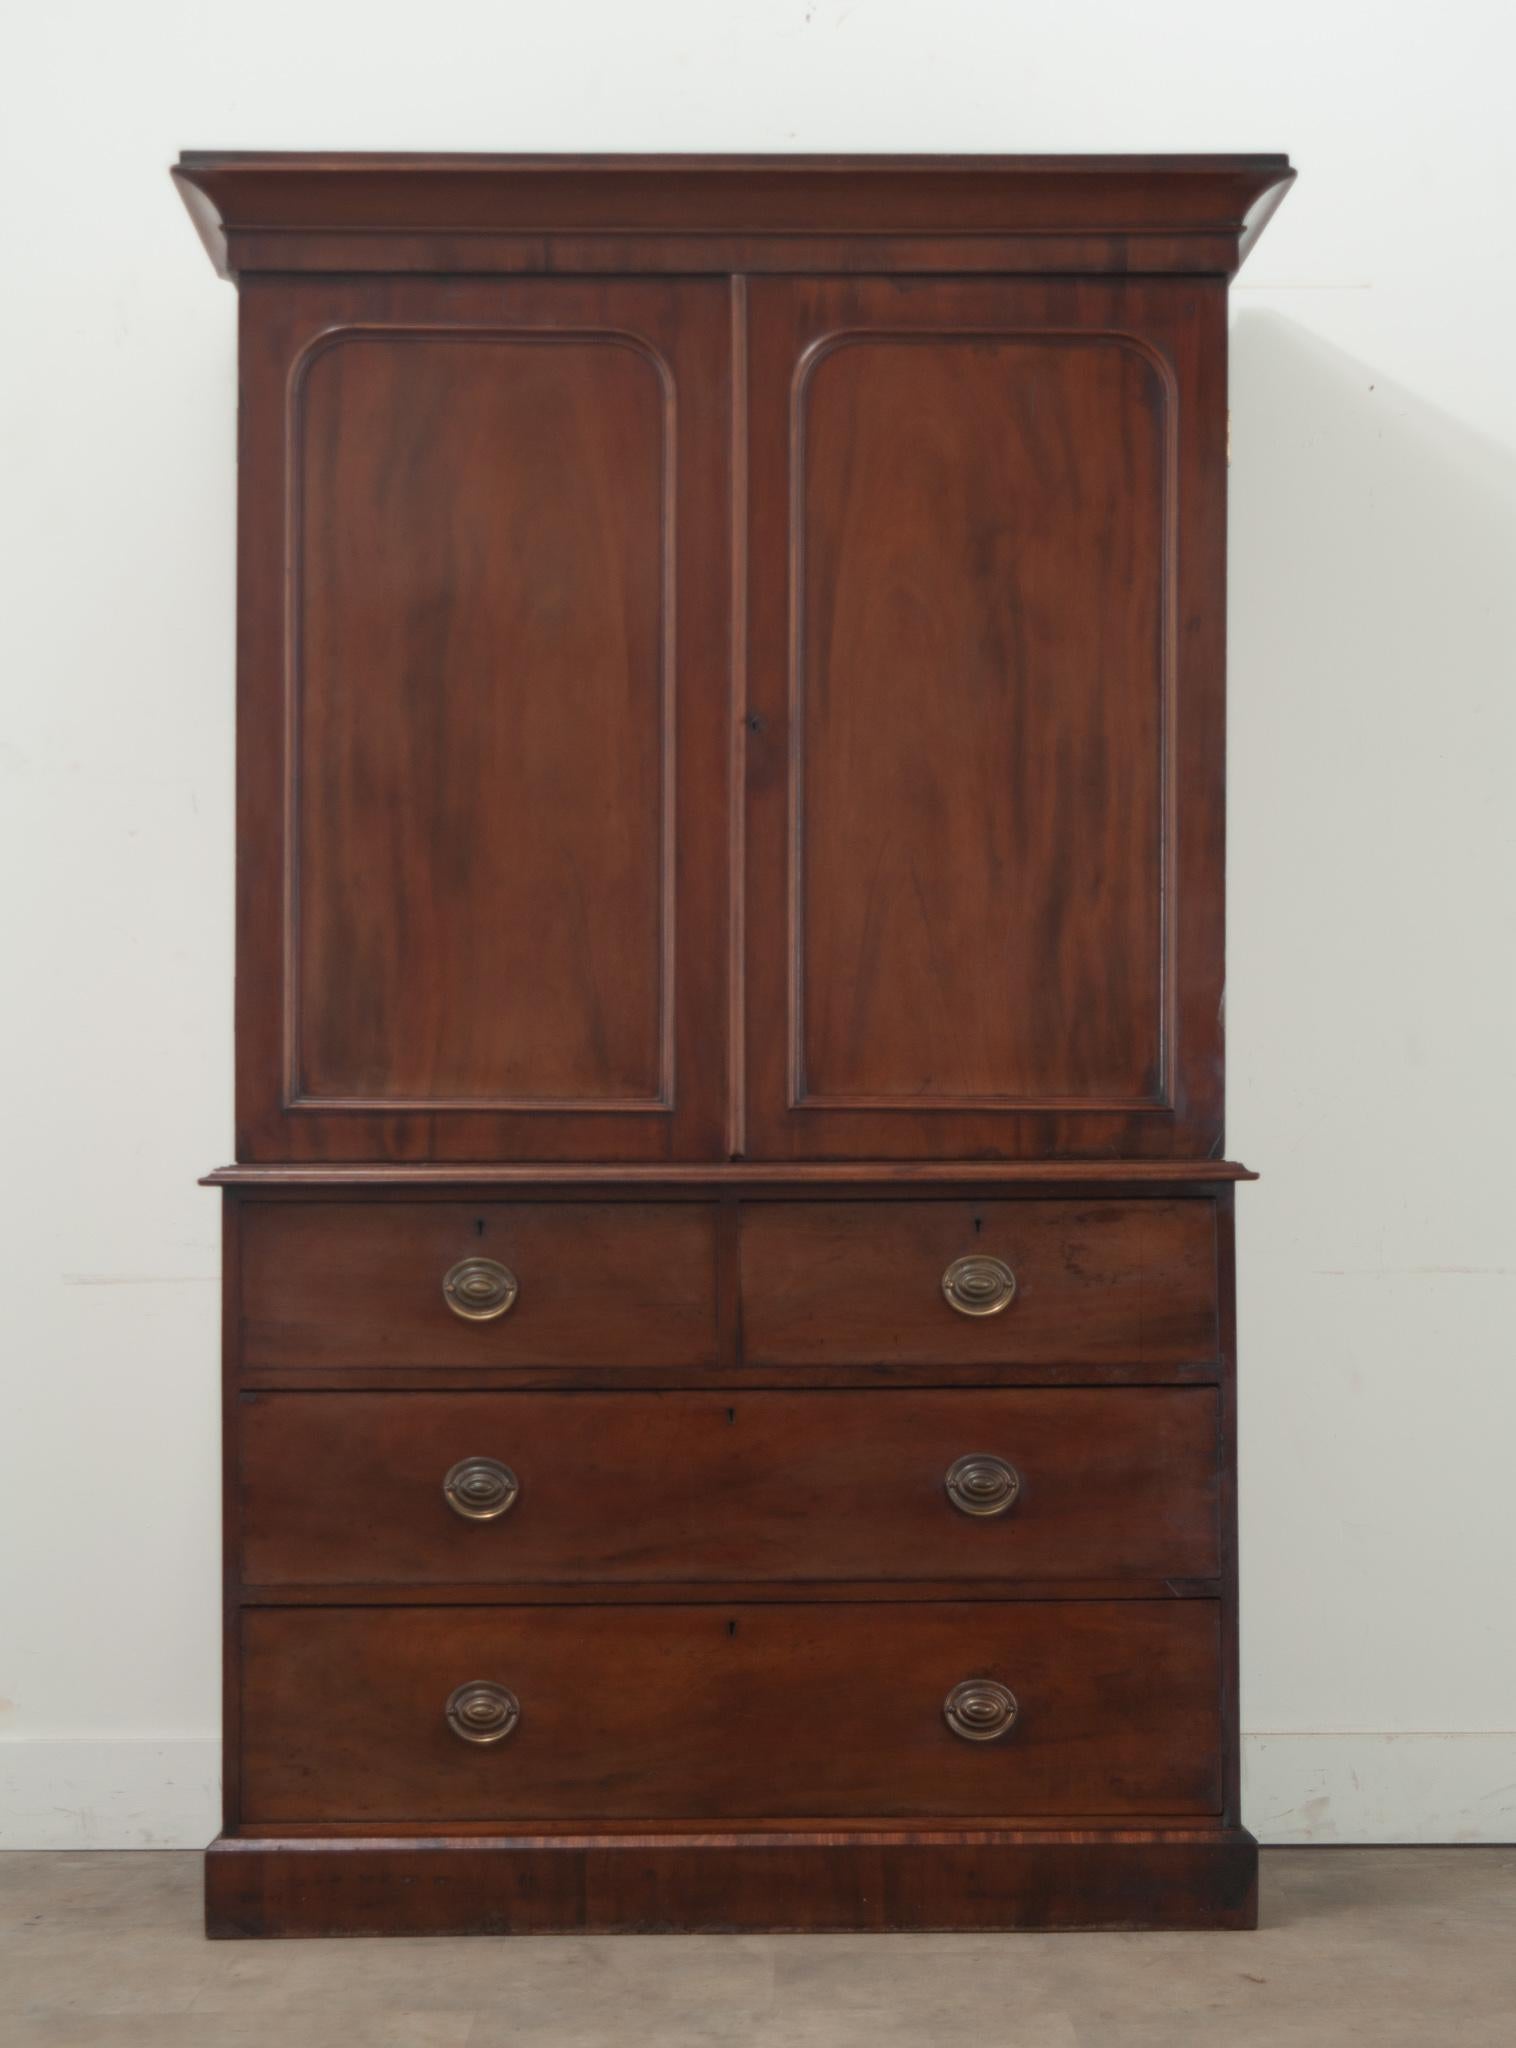 A large mahogany linen press made in England. This case piece has two paneled doors that open with a working lock and key to reveal four pull out linen press shelves at 16” deep. The bottom holds a chest of four roomy drawers, all with brass drawer